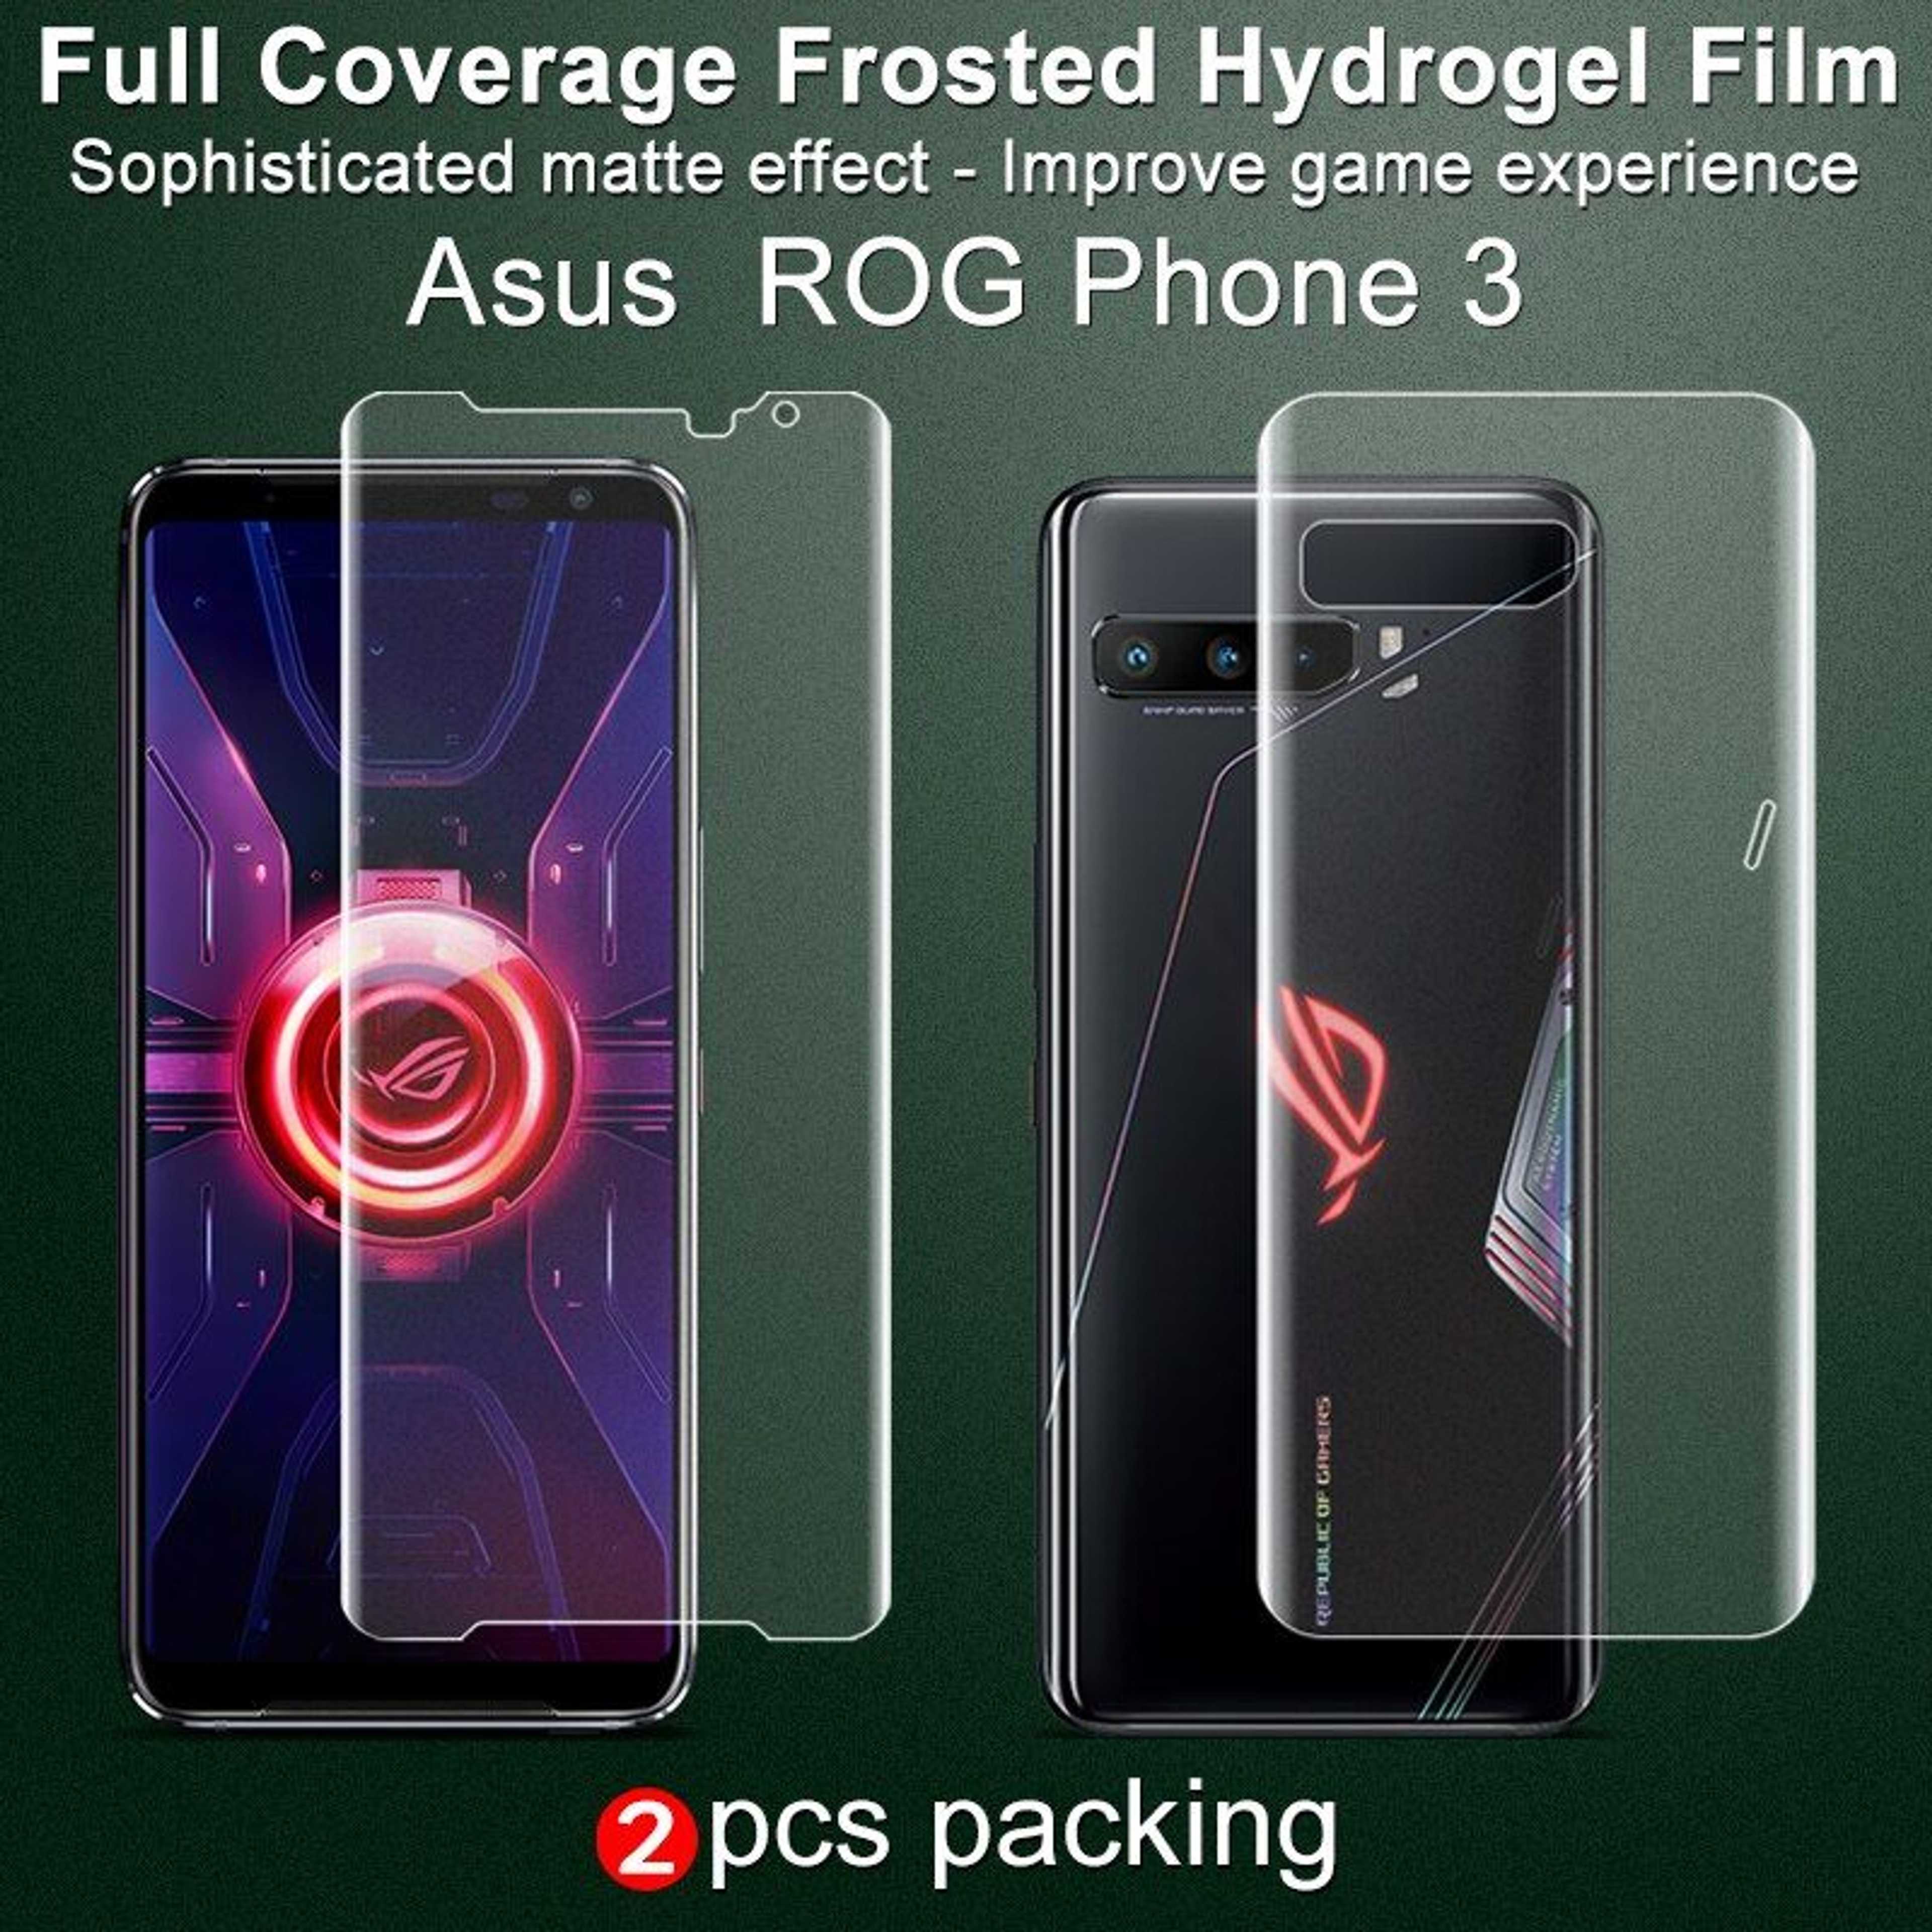 Asus_ROG Phone 3 Front & Back Hydrogel Film Jelly Screen Protector for Asus_ROG Phone 3